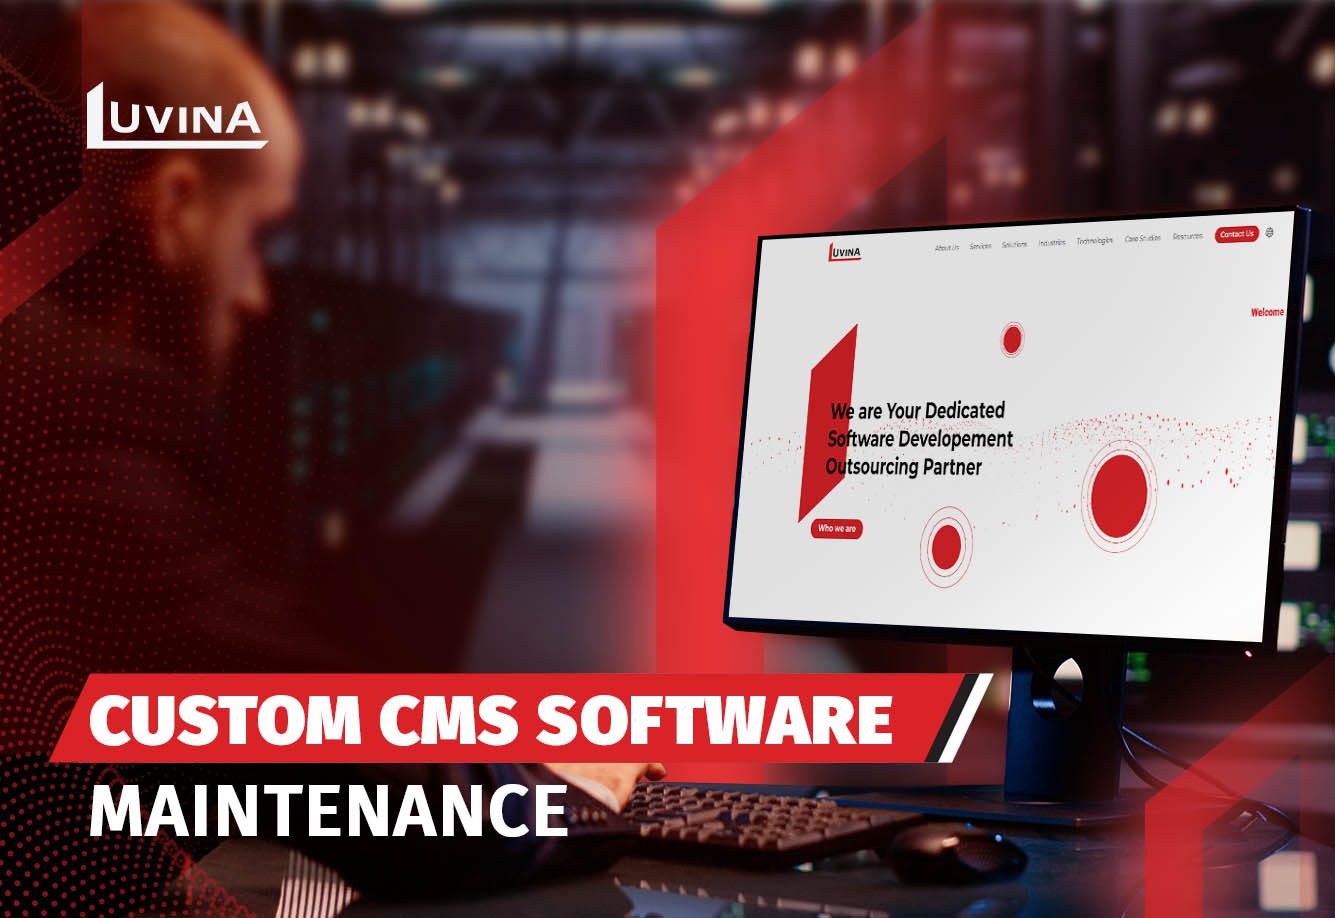 Delivering Excellence in Custom CMS Software Maintenance